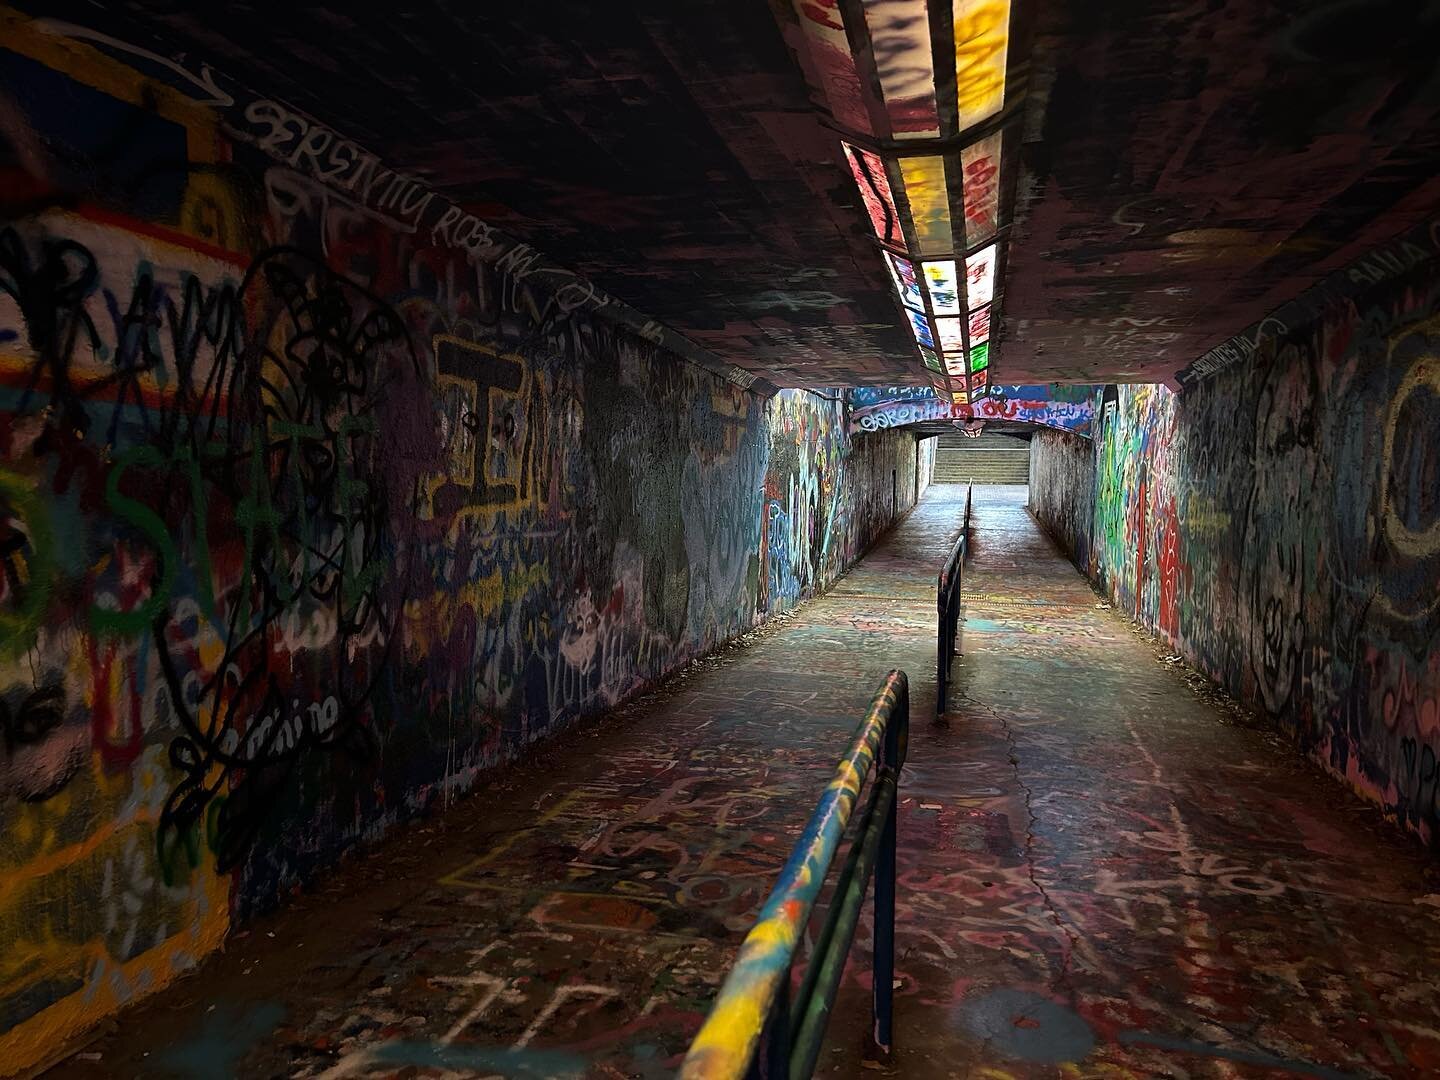 &ldquo;On 25 October 1967, Student Government at NC State passed a &lsquo;student visual expression&rsquo; bill to allow students to paint in one of the tunnels under the railroad tracks. At that time the tunnel was known as the Student Supply Store 